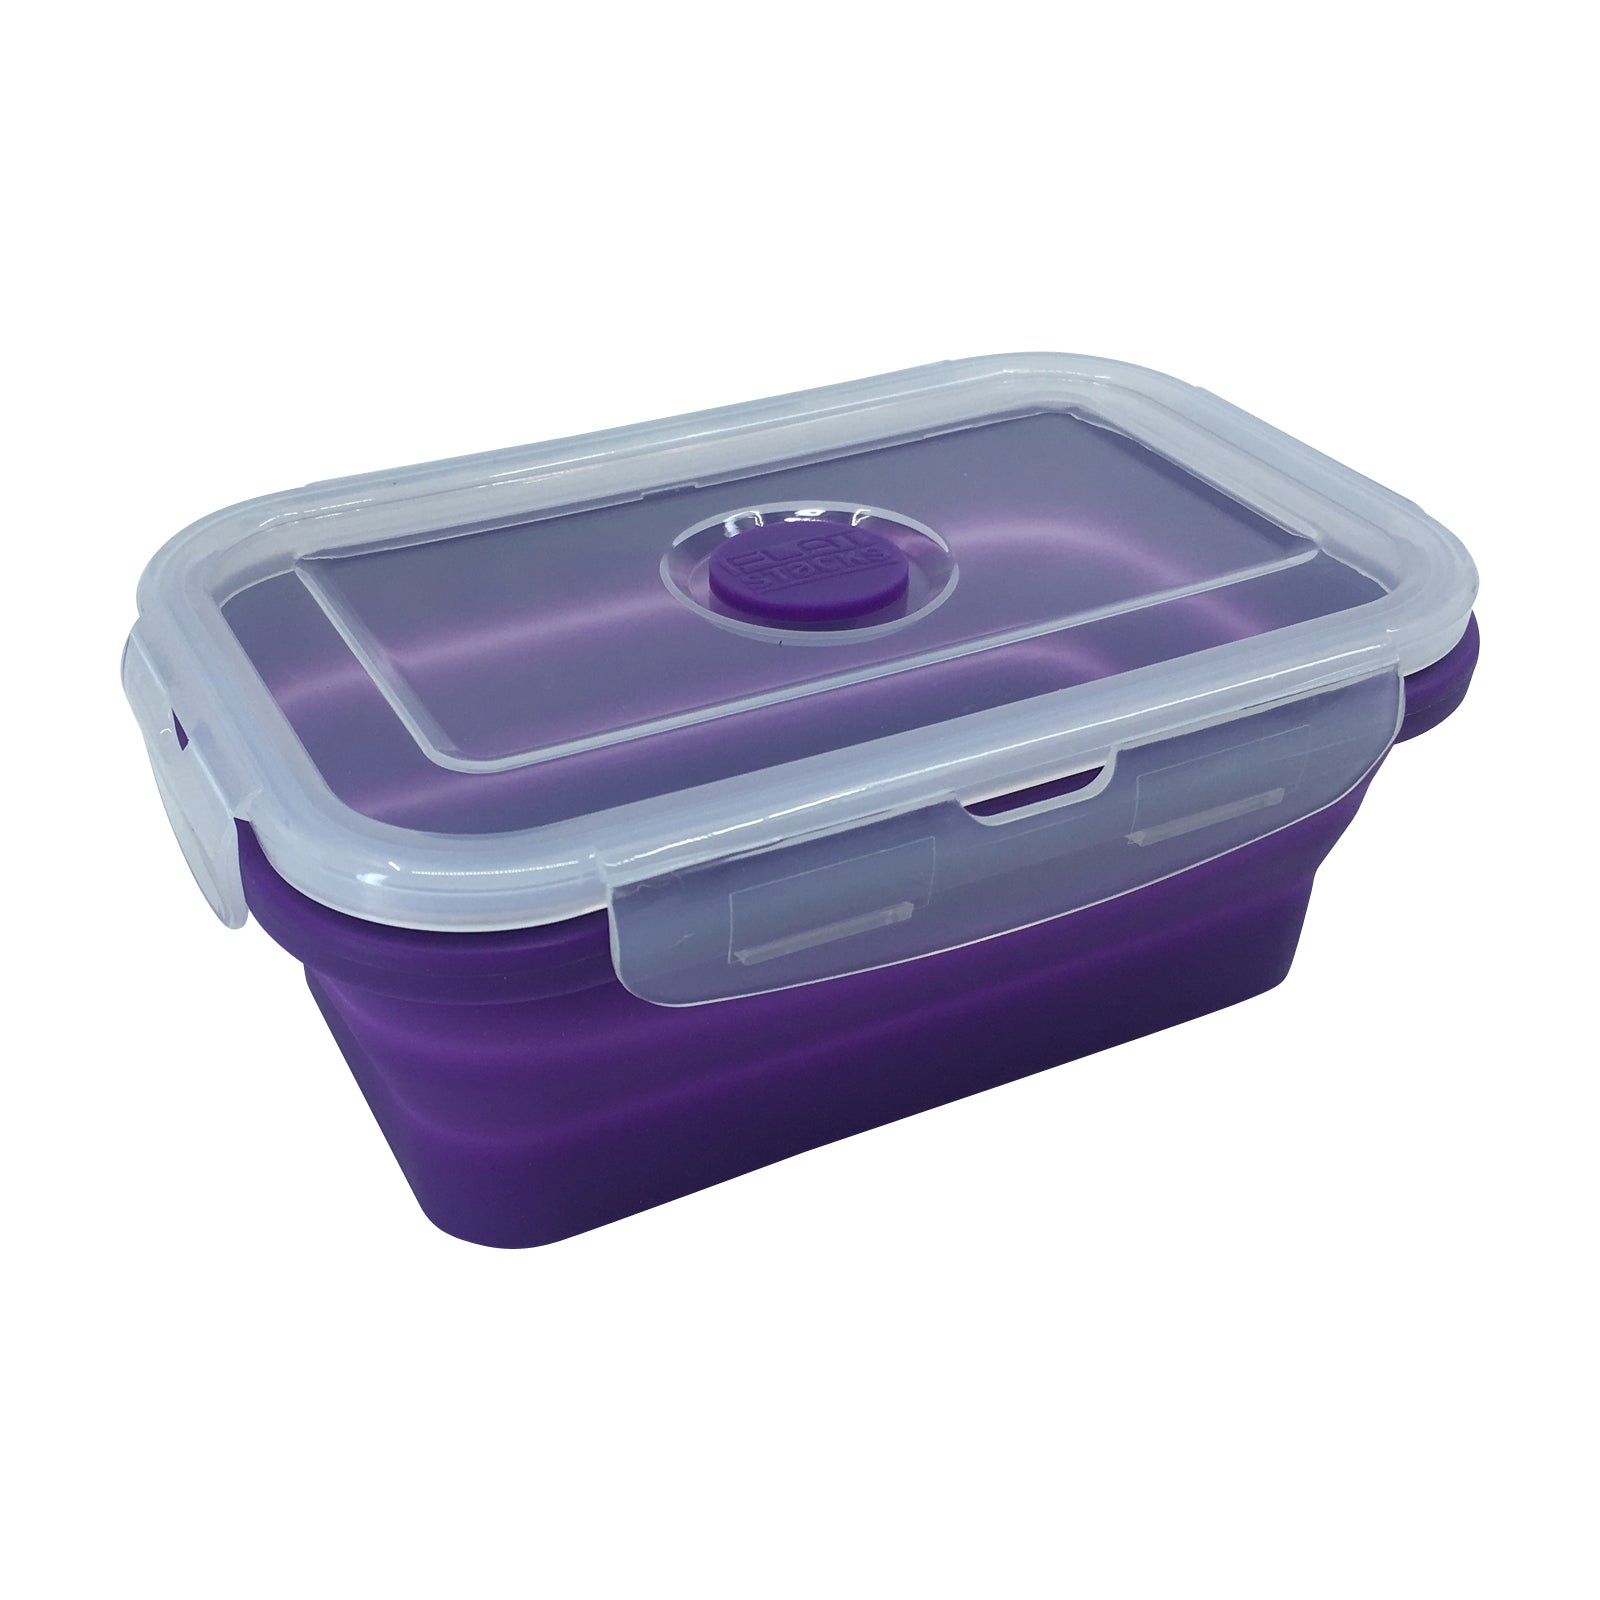 Flat Stack Collapsible Containers 3 Piece Set: Space Saving - Nova UK